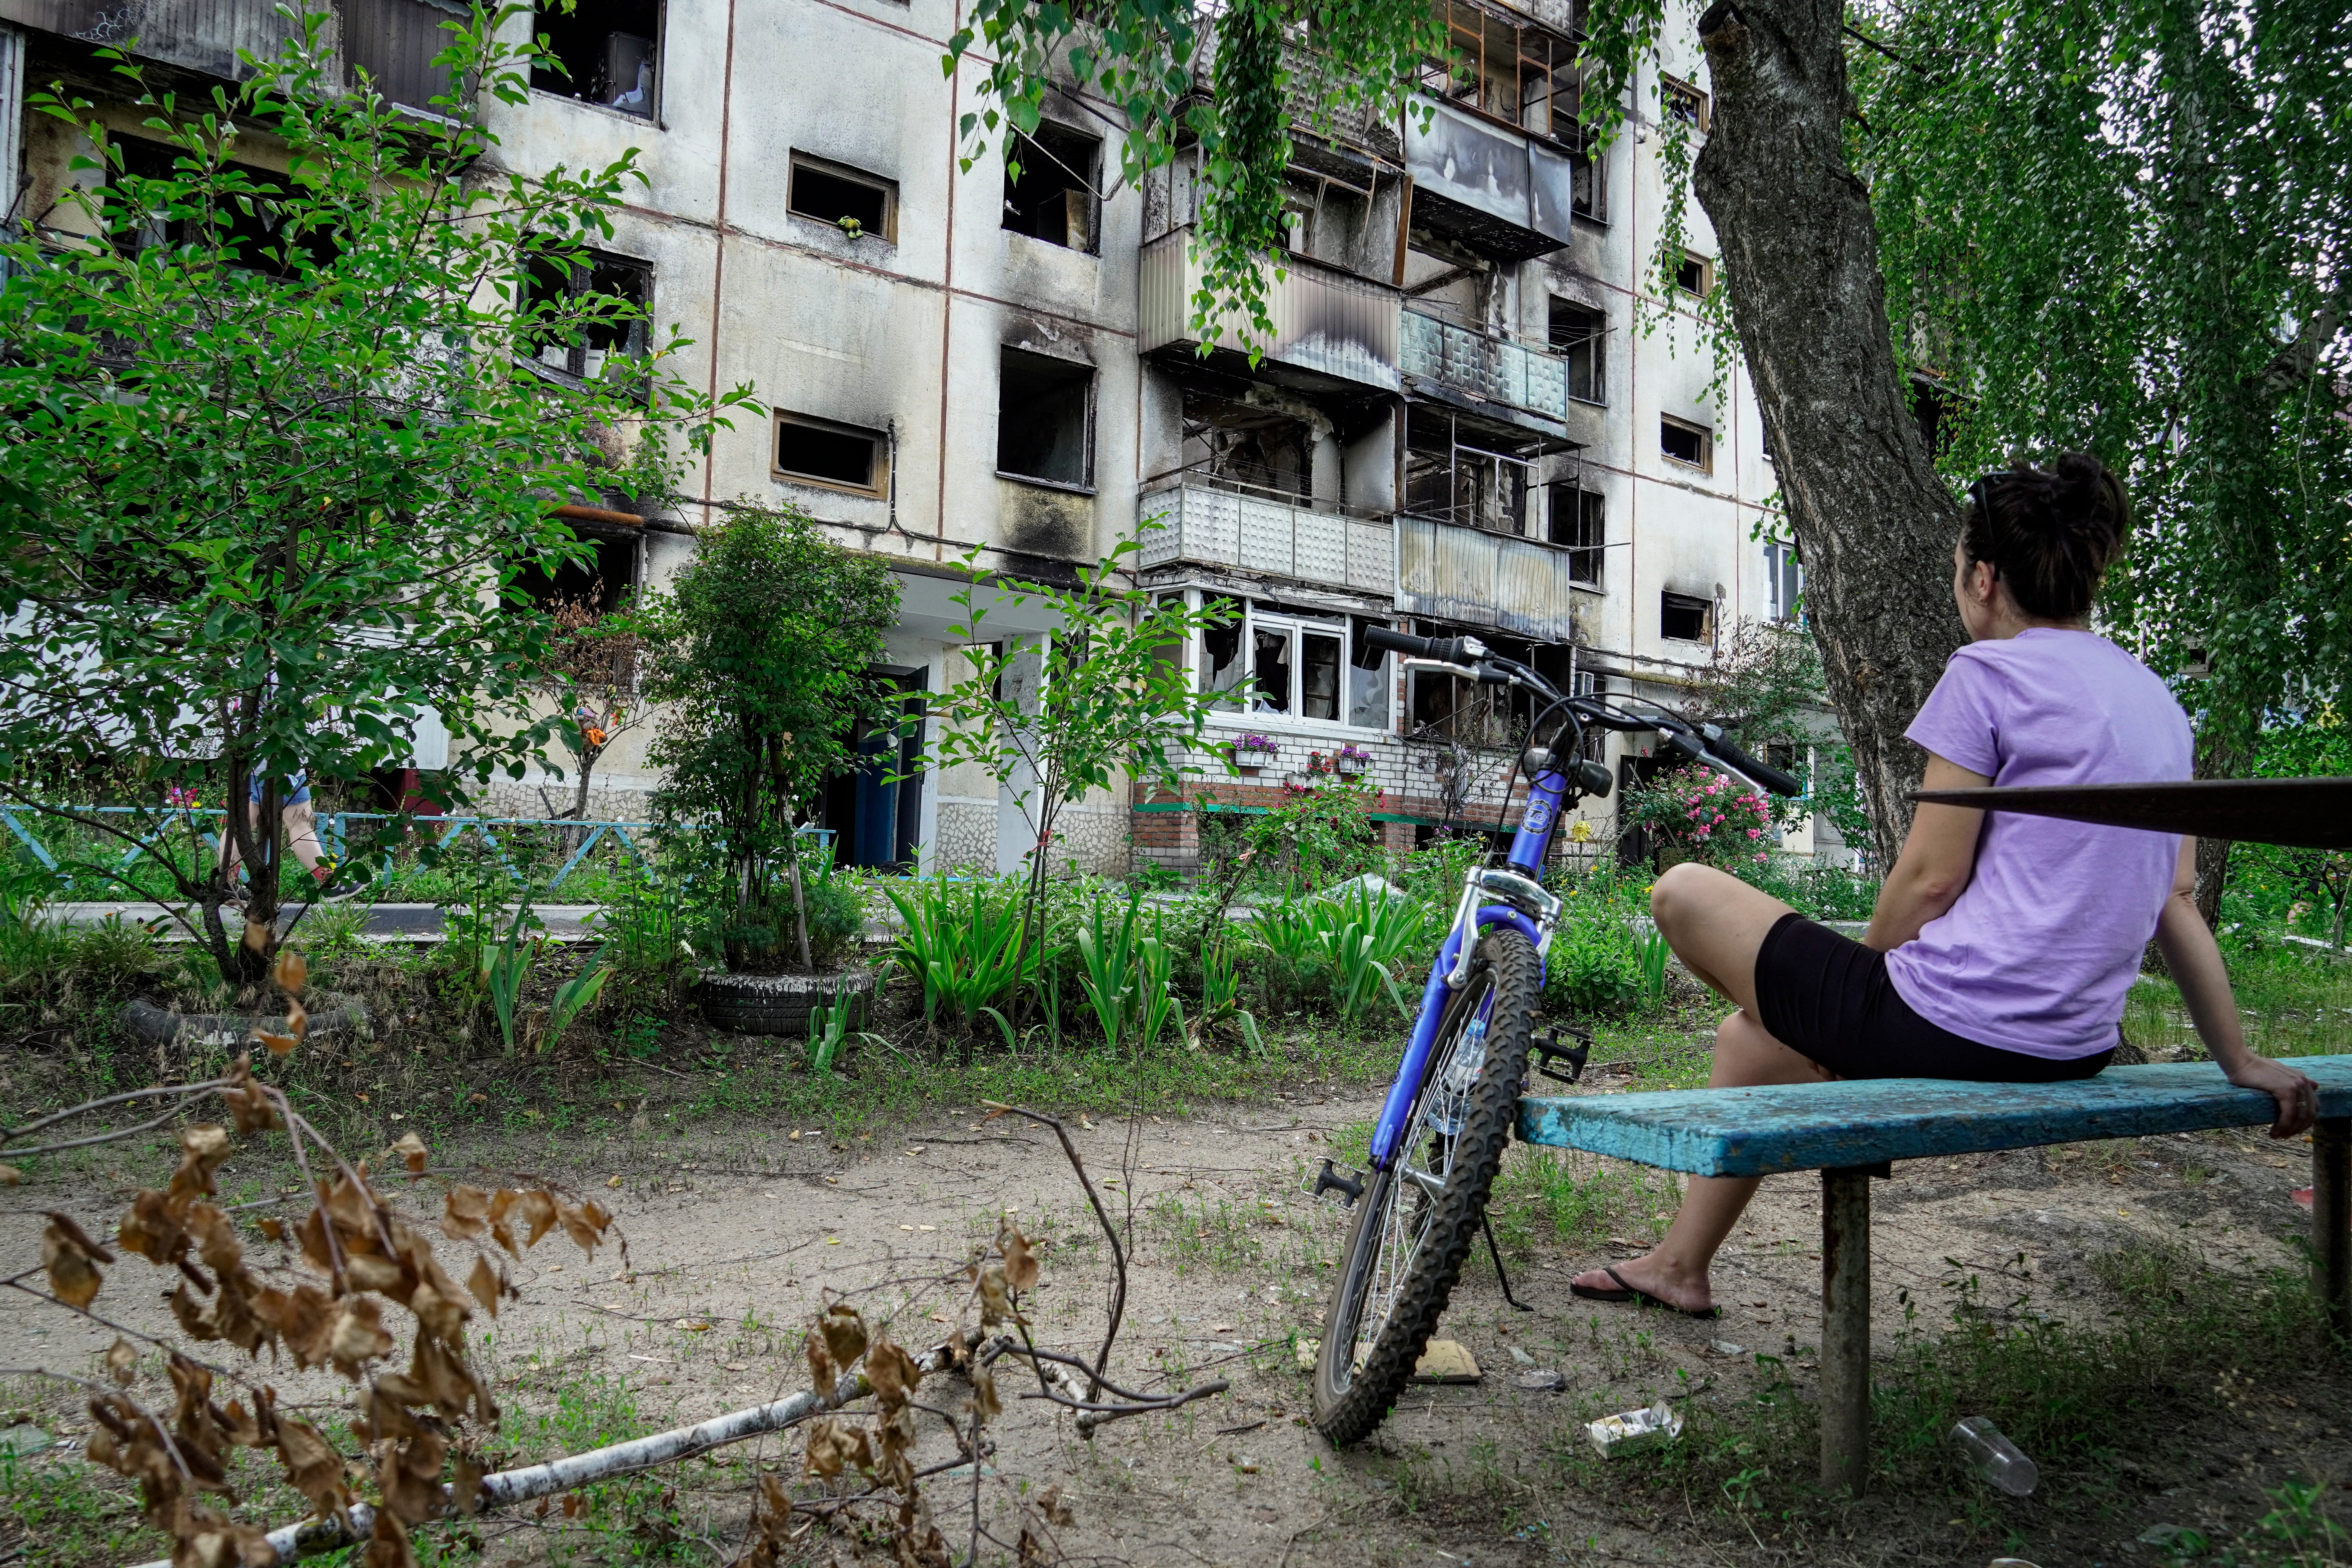 A local woman sits in front of the damaged residential building in Shebekino, Belgorod region, Russia